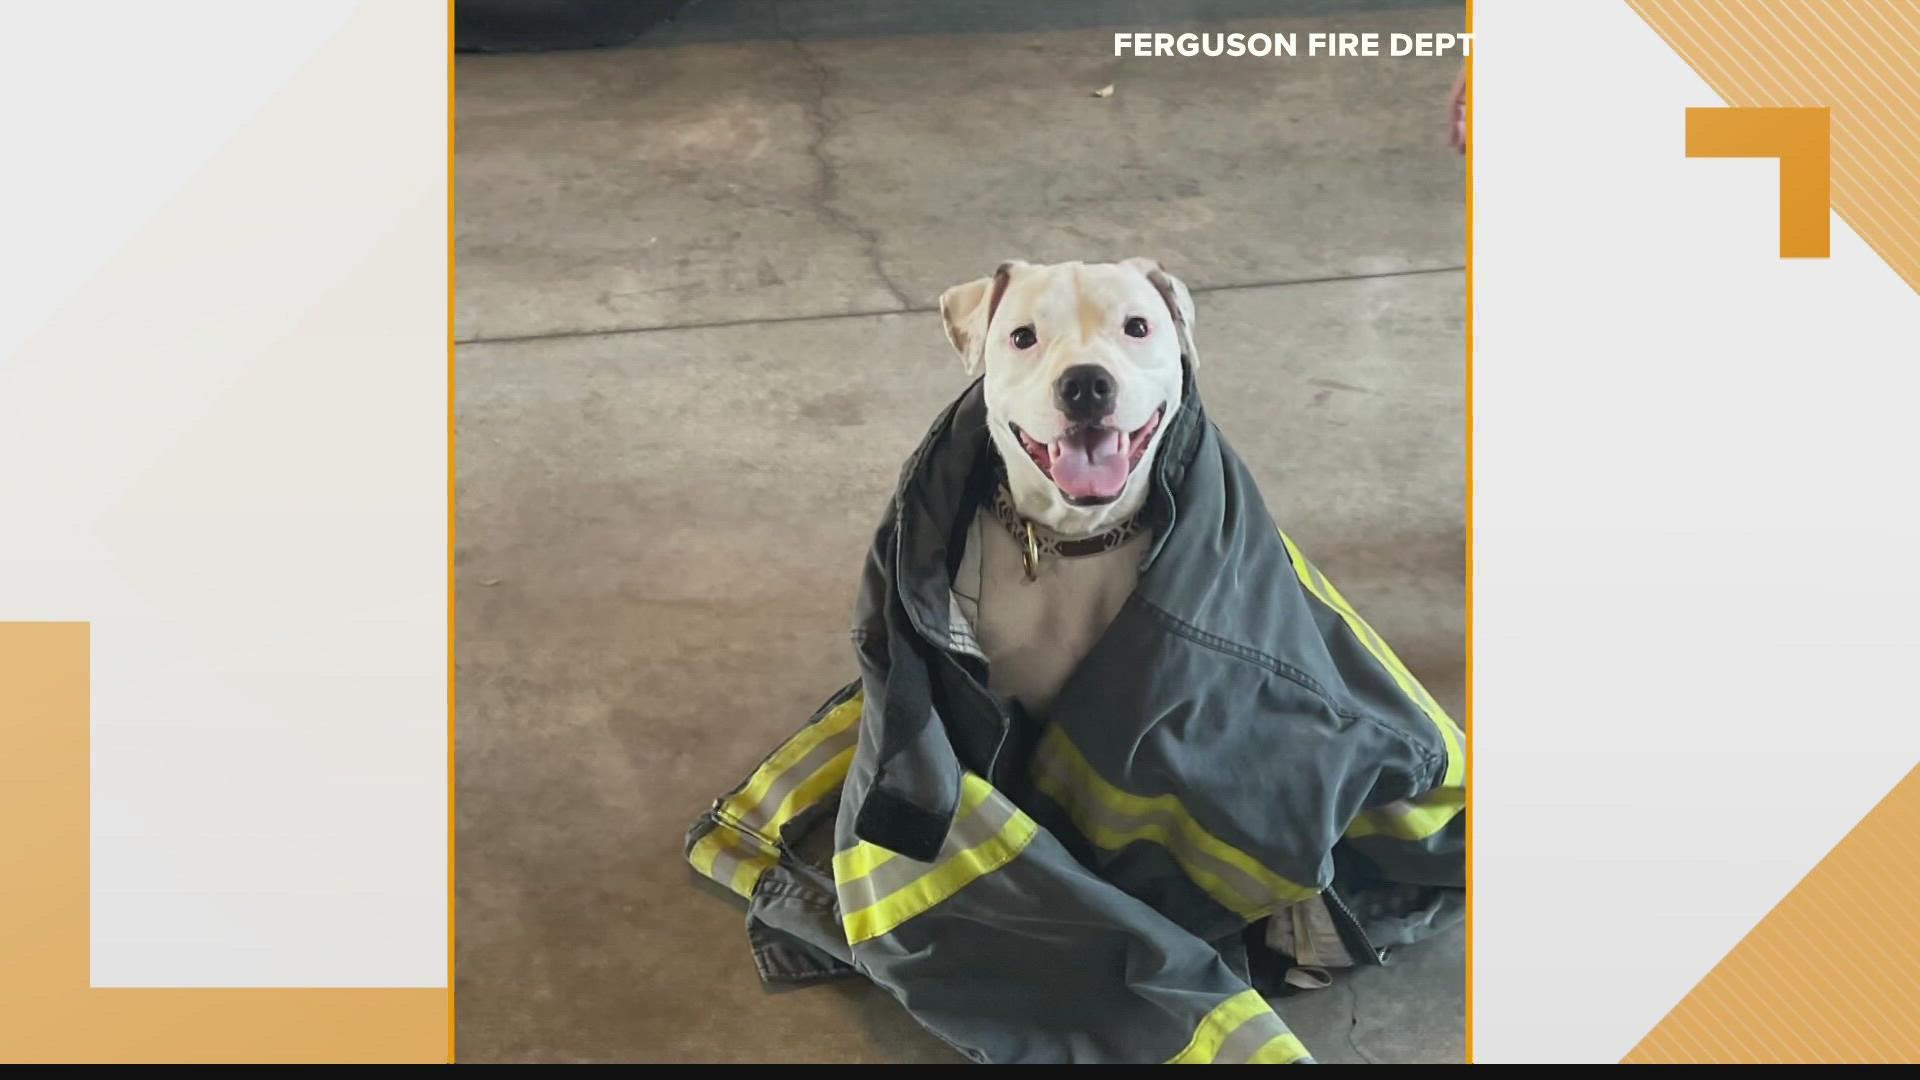 The new firehouse pup was found earlier this month wandering around by construction workers. The department needs help naming her.